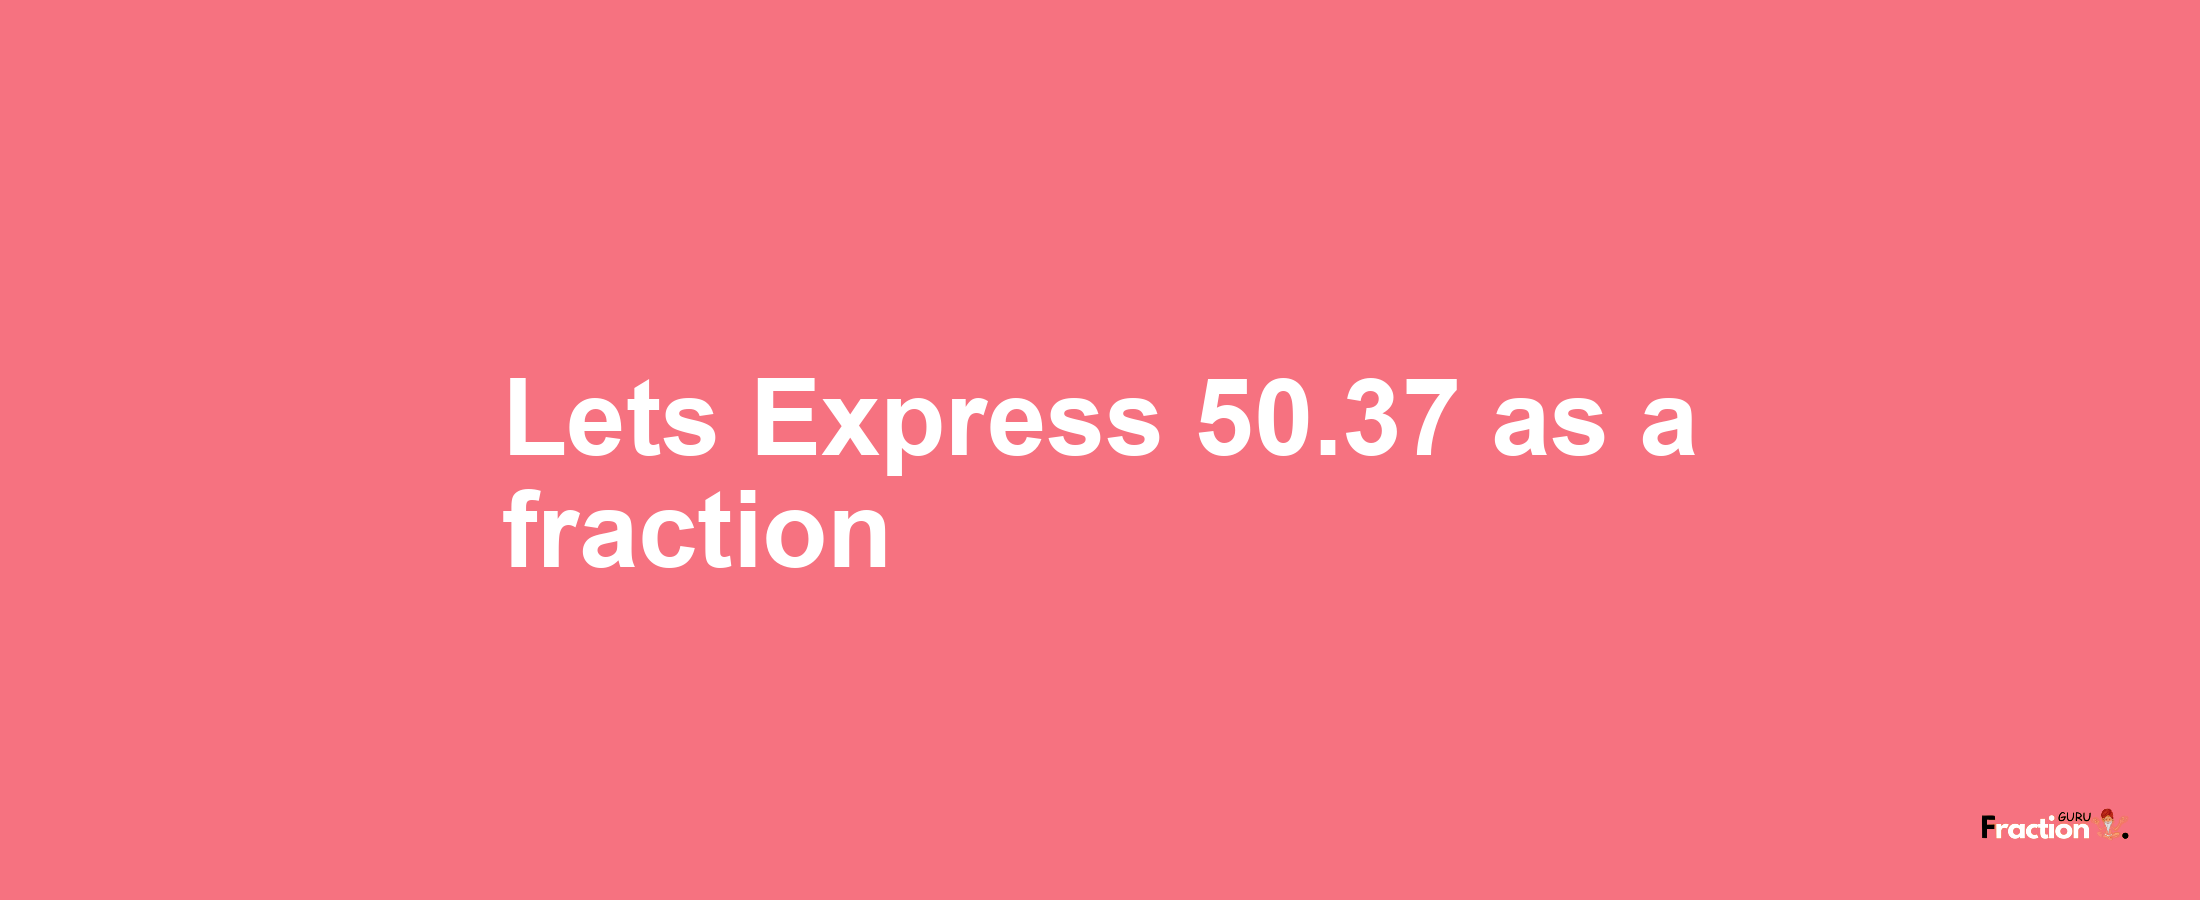 Lets Express 50.37 as afraction